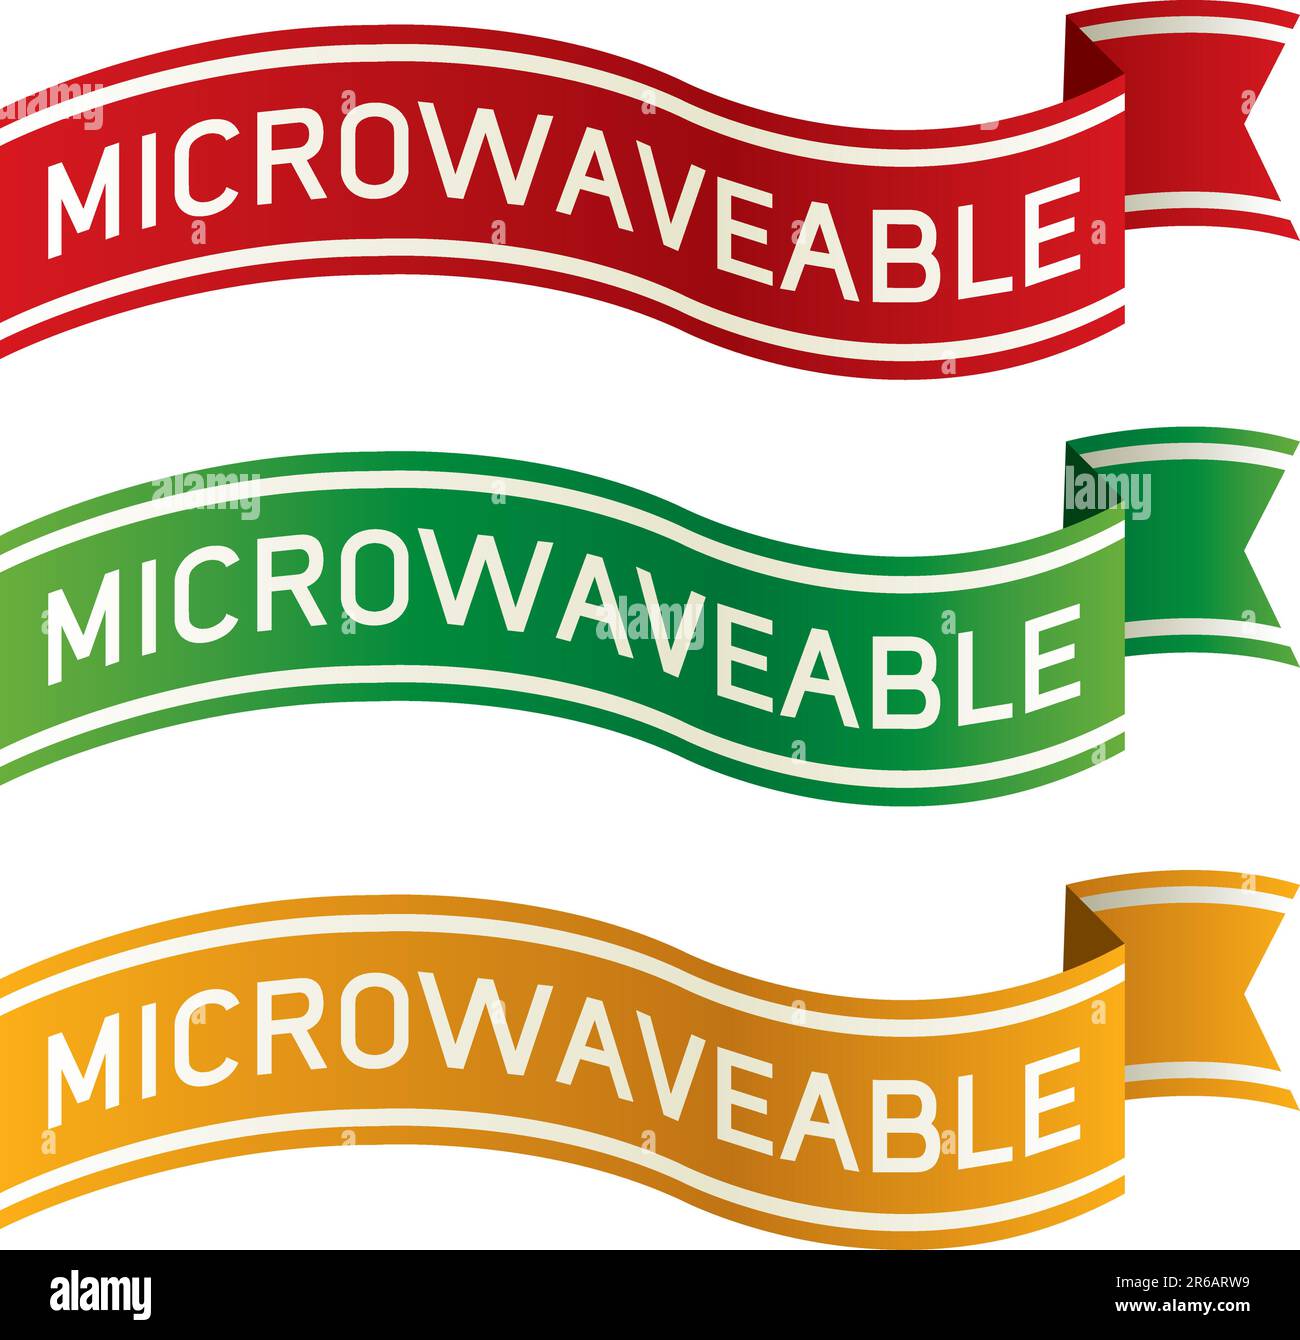 Microwaveable banners for food product packaging, print materials, and websites Stock Vector